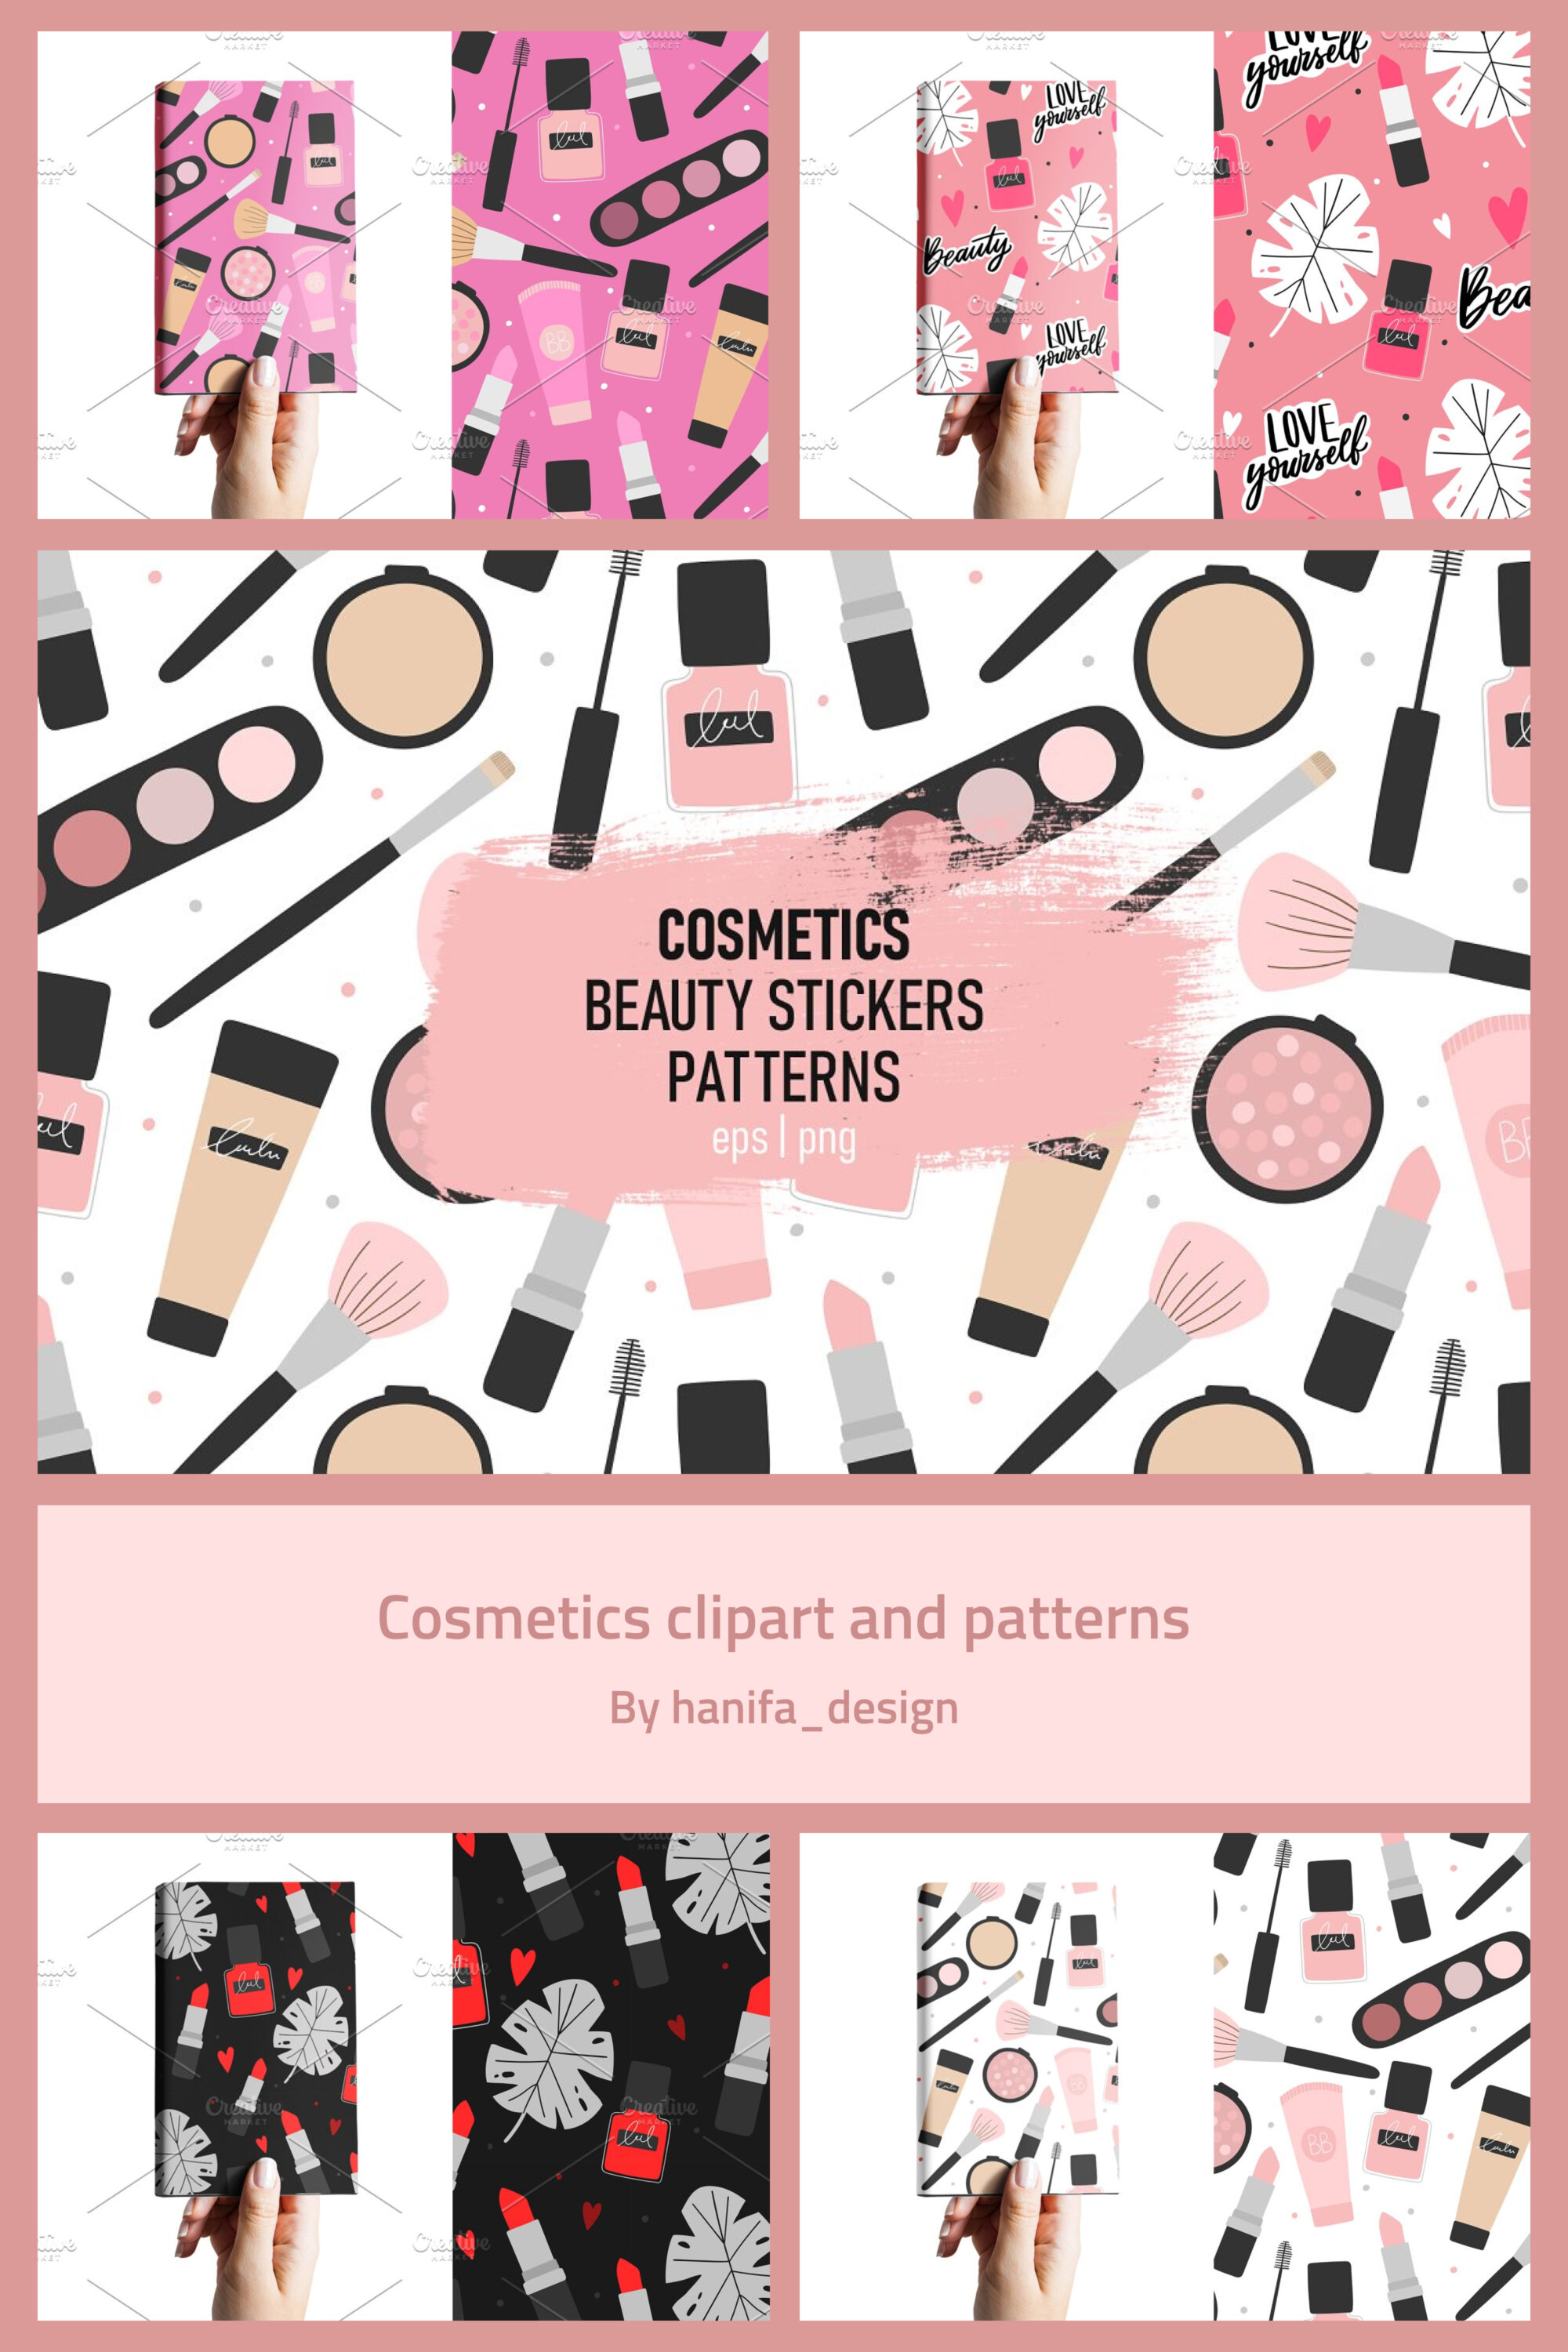 Cosmetics clipart and patterns of pinterest.